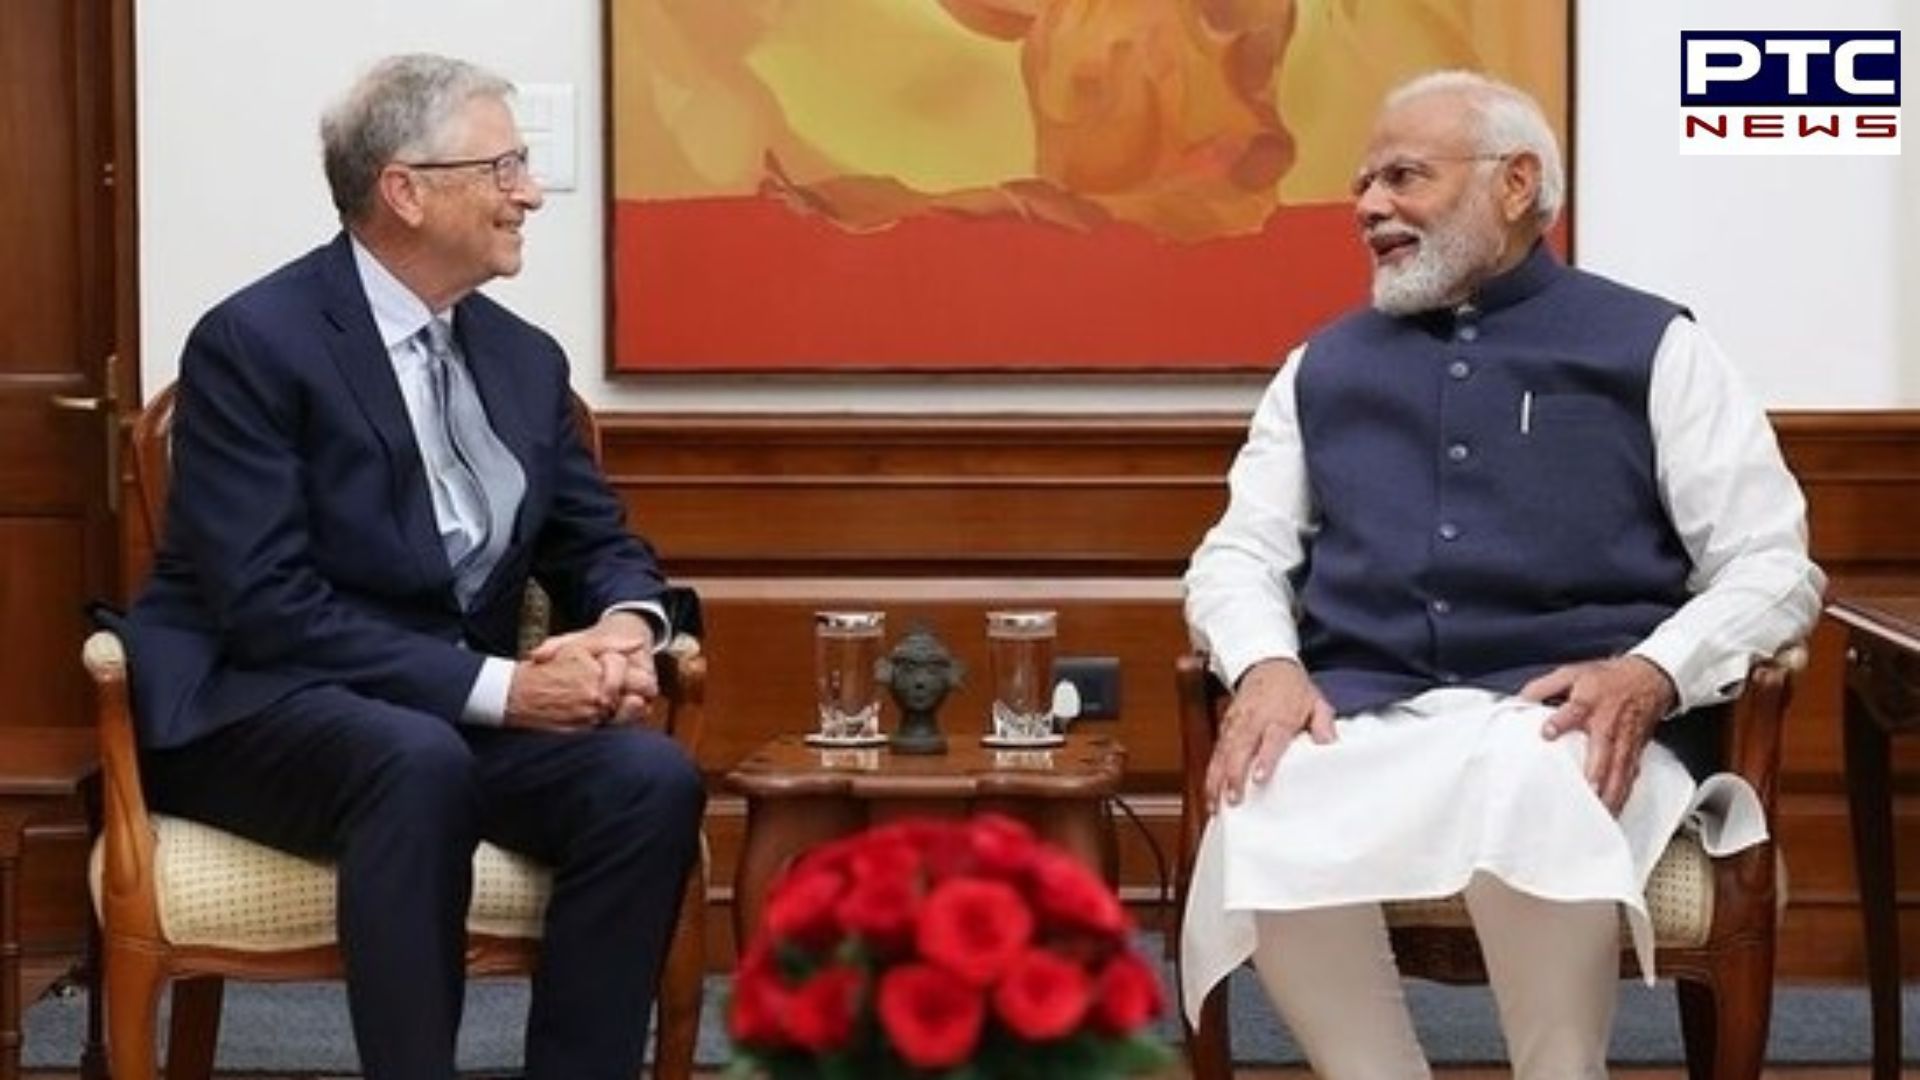 Bill Gates commends India's digital governance in discussion with PM Modi